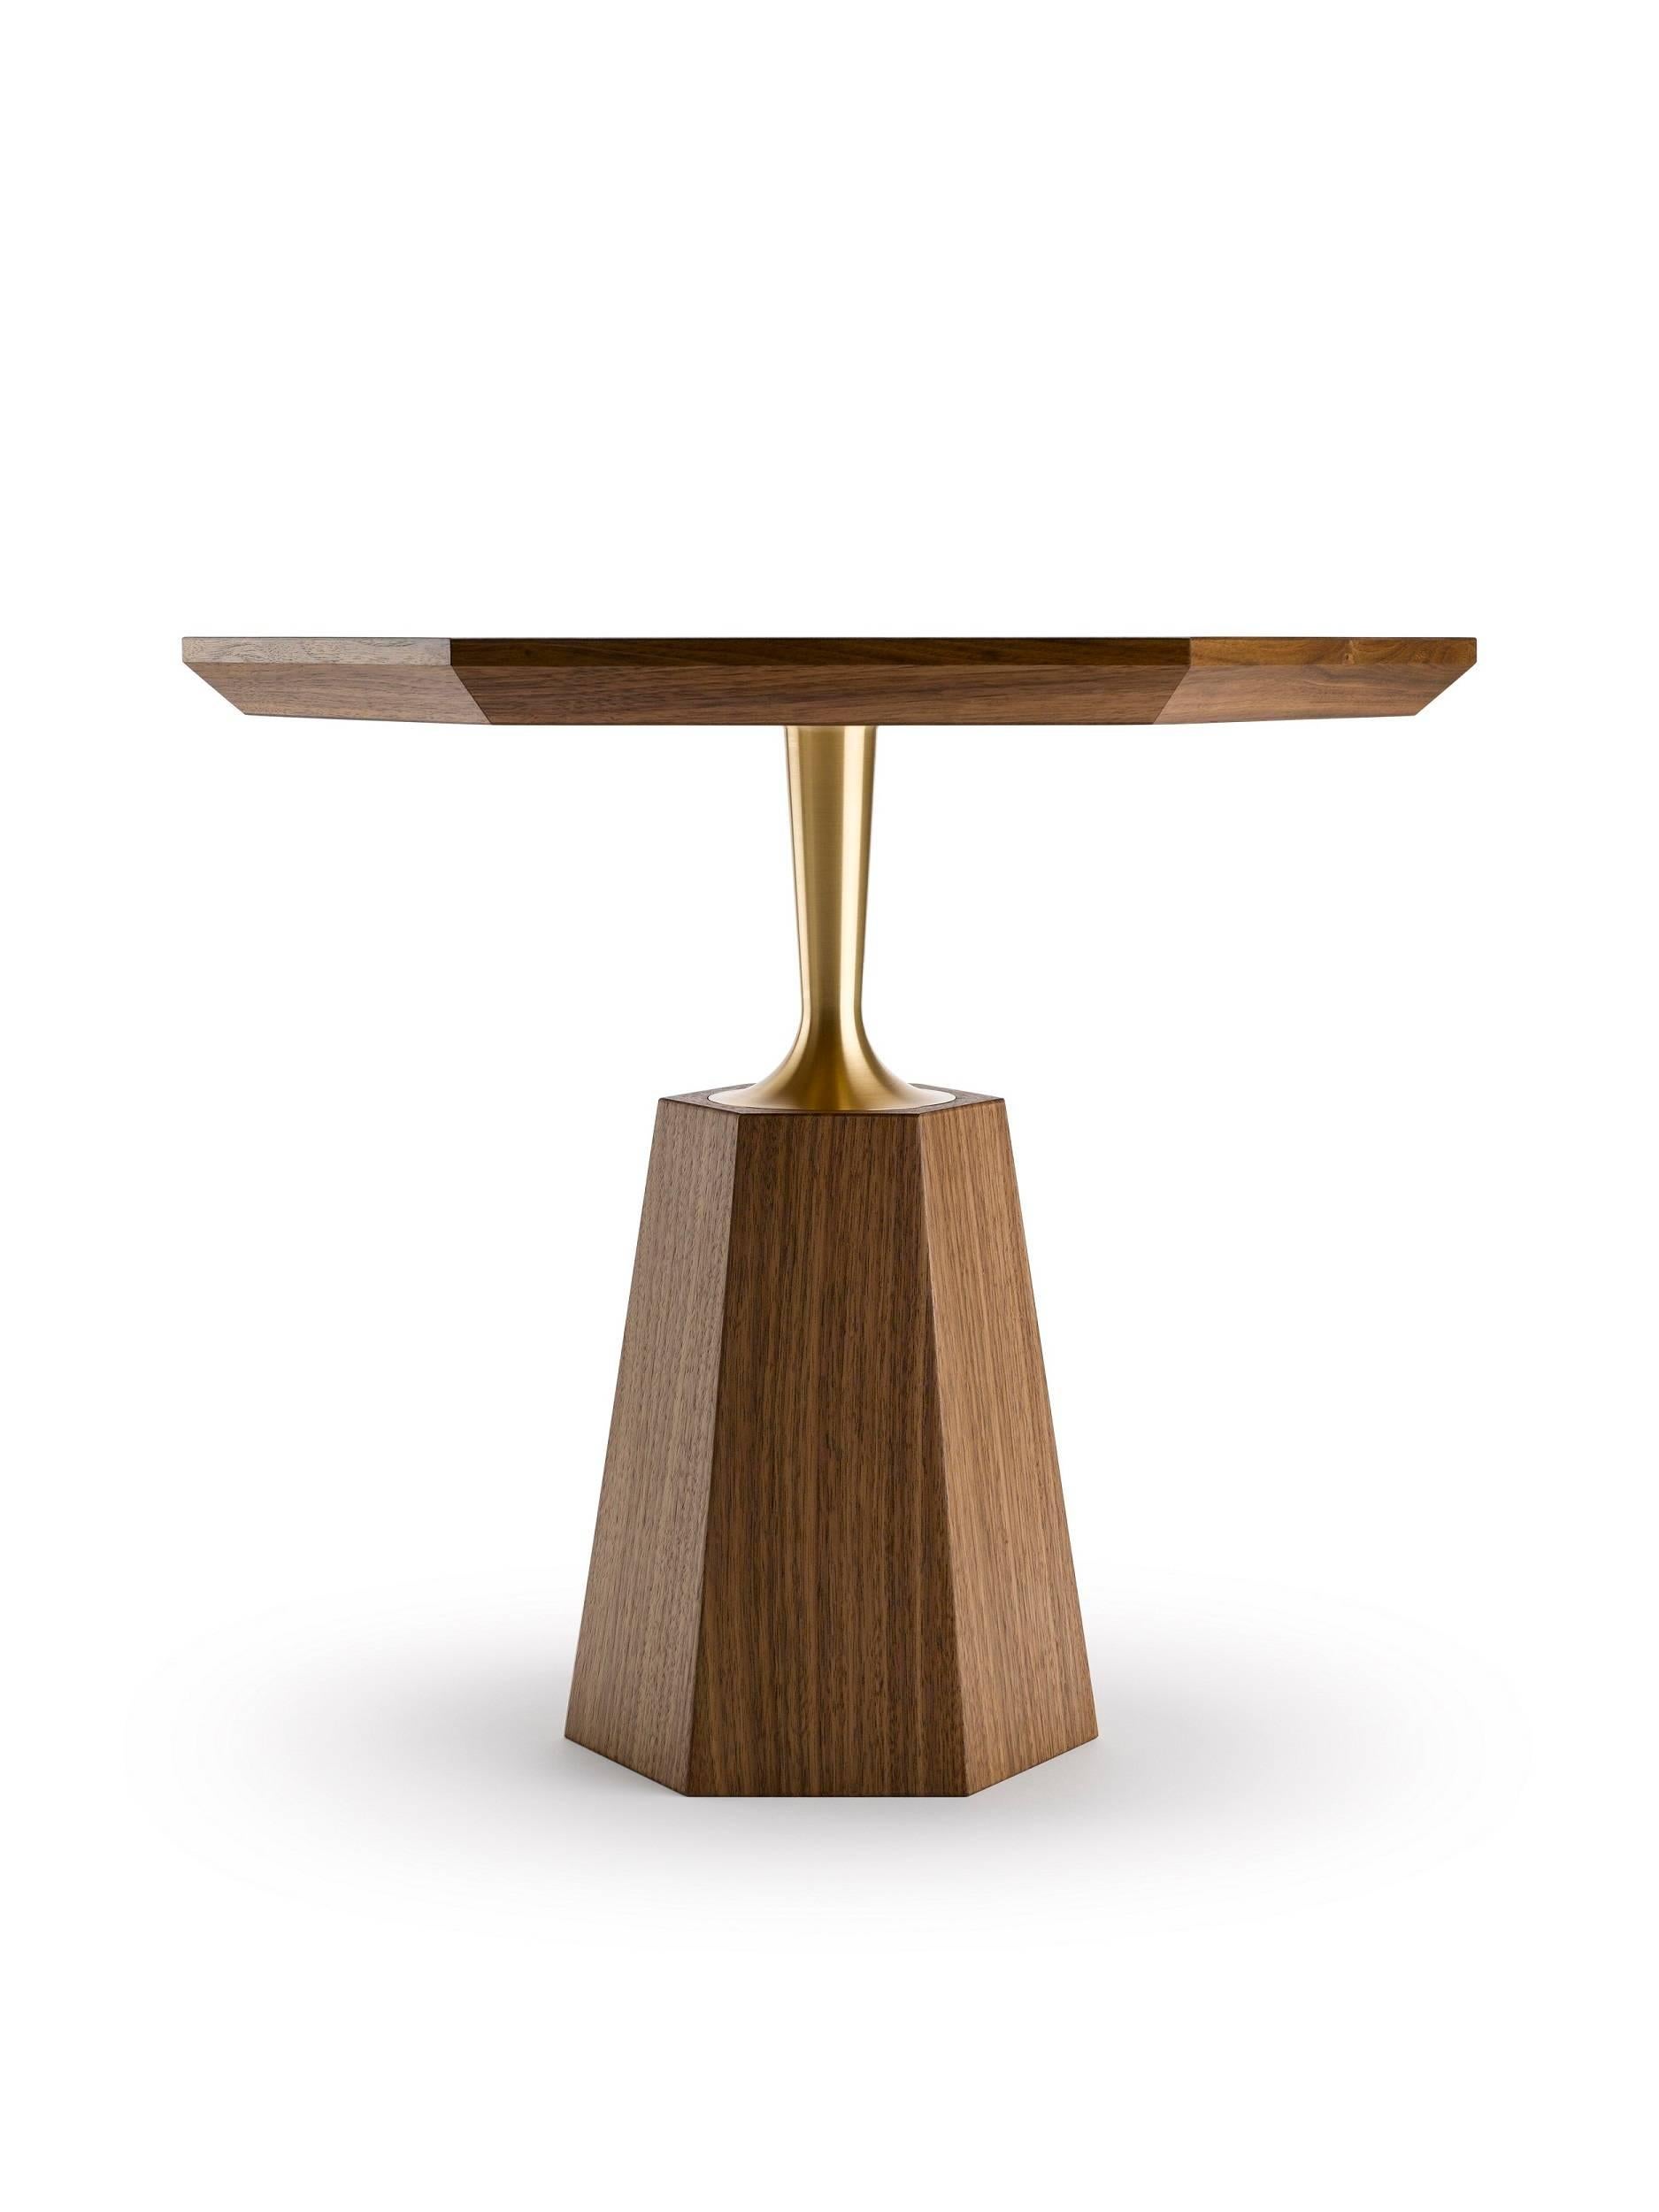 The Hex Occasional Table has a hexagonal tapering base giving rise to a precision engineered brass neck that supports a hexagonal top, shown here in natural oiled walnut and machine turned solid brass.
The brass is available in either a natural or